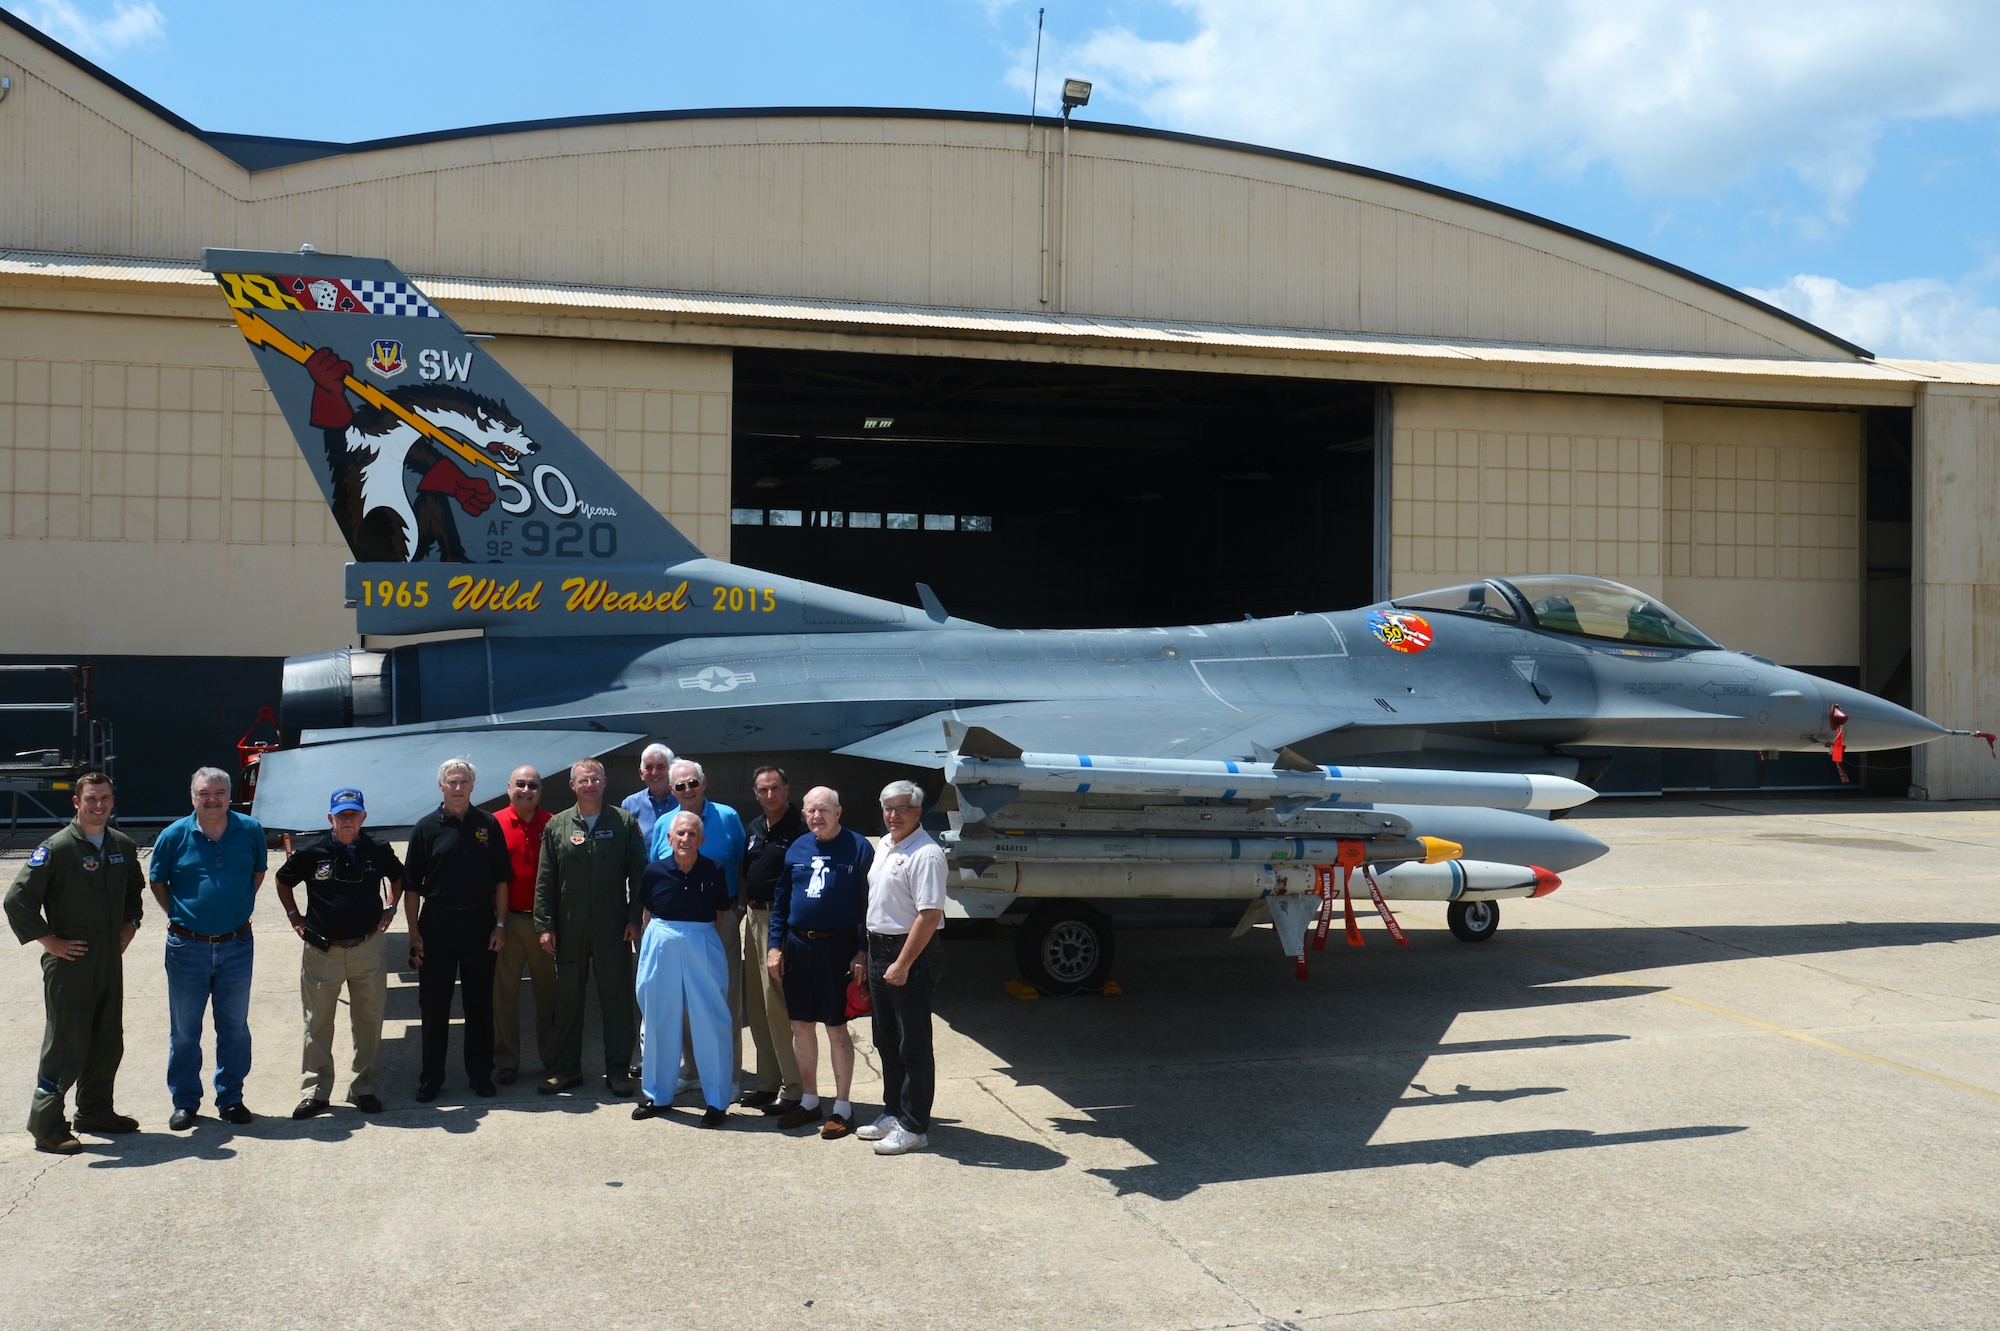 Retired U.S. Air Force Wild Weasel pose for a photo with present Wild Weasels in front of the newly unveiled 20th Fighter Wing flagship F-16CM Fighting Falcon at Shaw Air Force Base, S.C., June 5, 2015. The aircraft was recently painted with a Wild Weasel scheme on the tail for the 50th anniversary of the Wild Weasels. (U.S. Air Force photo by Senior Airman Jonathan Bass/Released)